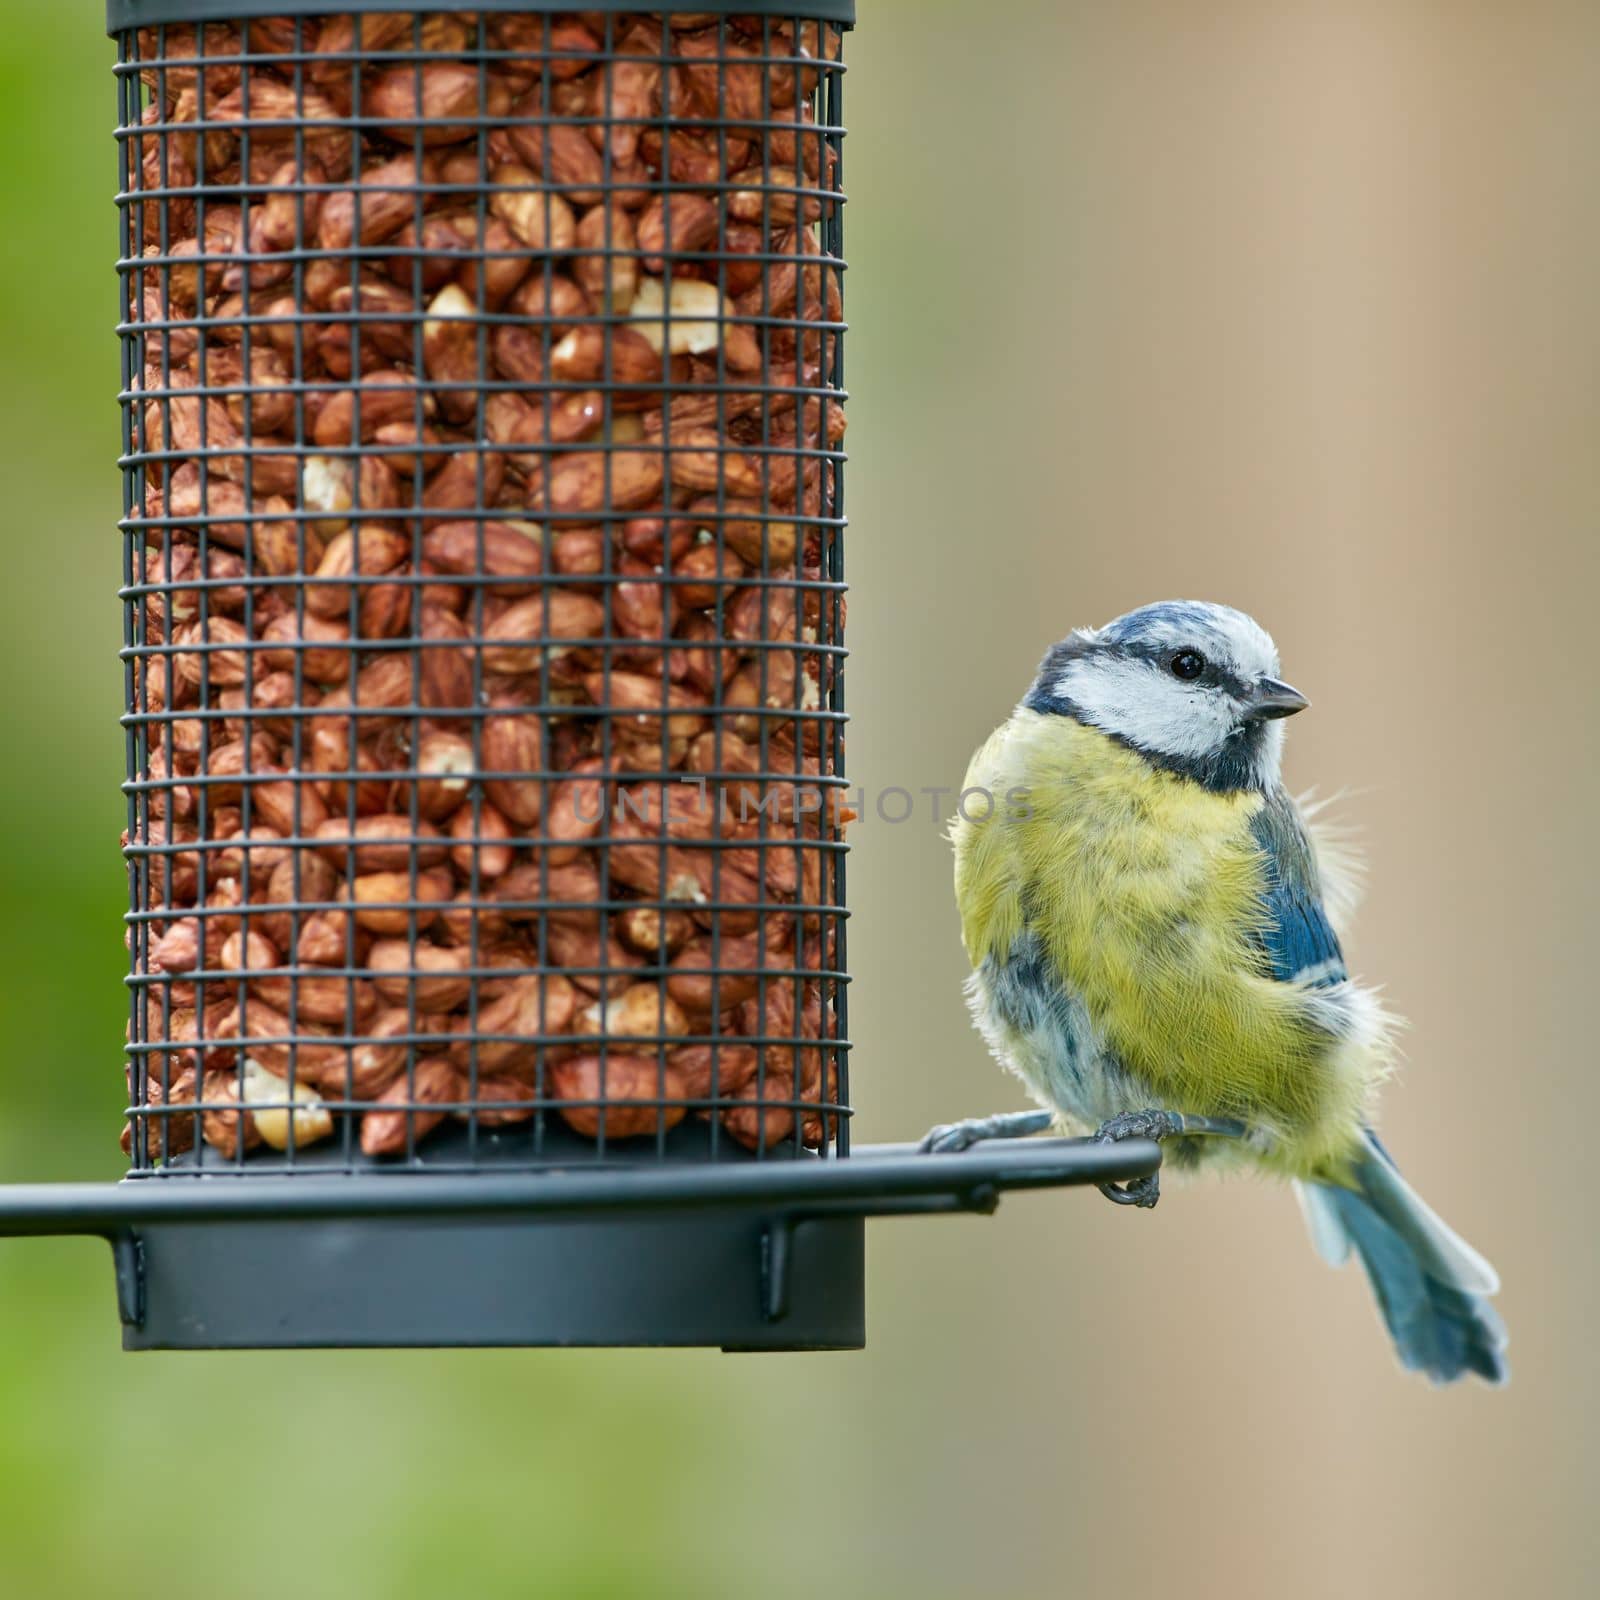 Blue tit. The Eurasian blue tit is a small passerine bird in the tit family Paridae. The bird is easily recognisable by its blue and yellow plumage